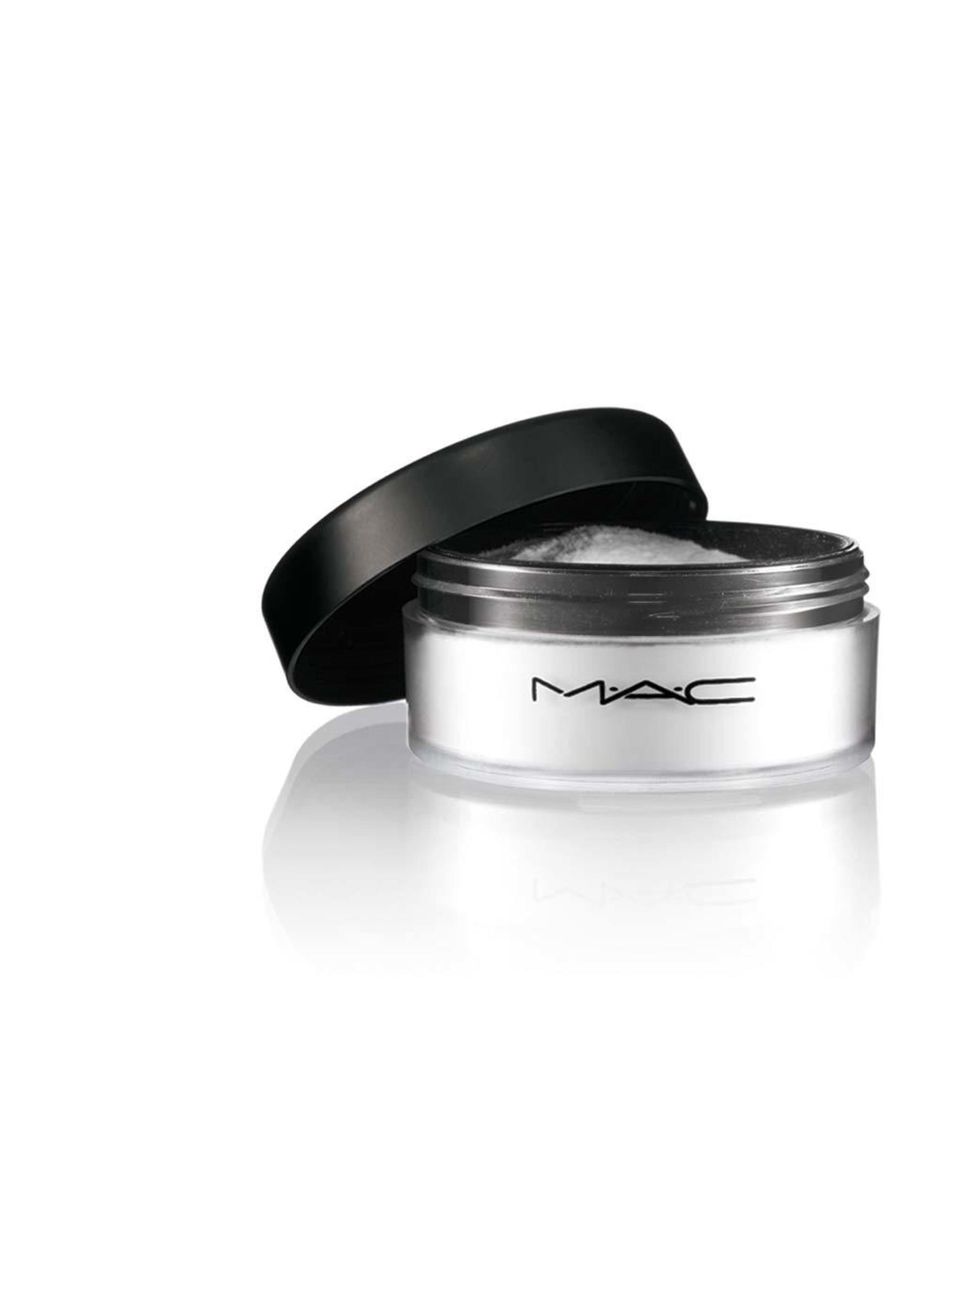 <p>Shoots last hours and under the heat from the camera and bright lights make-up can quickly fade  the same goes for hot summer days. Applying <a href="http://www.maccosmetics.co.uk/product/159/4462/Products/Face/Powder/Prep-Prime-Transparent-Finishing-